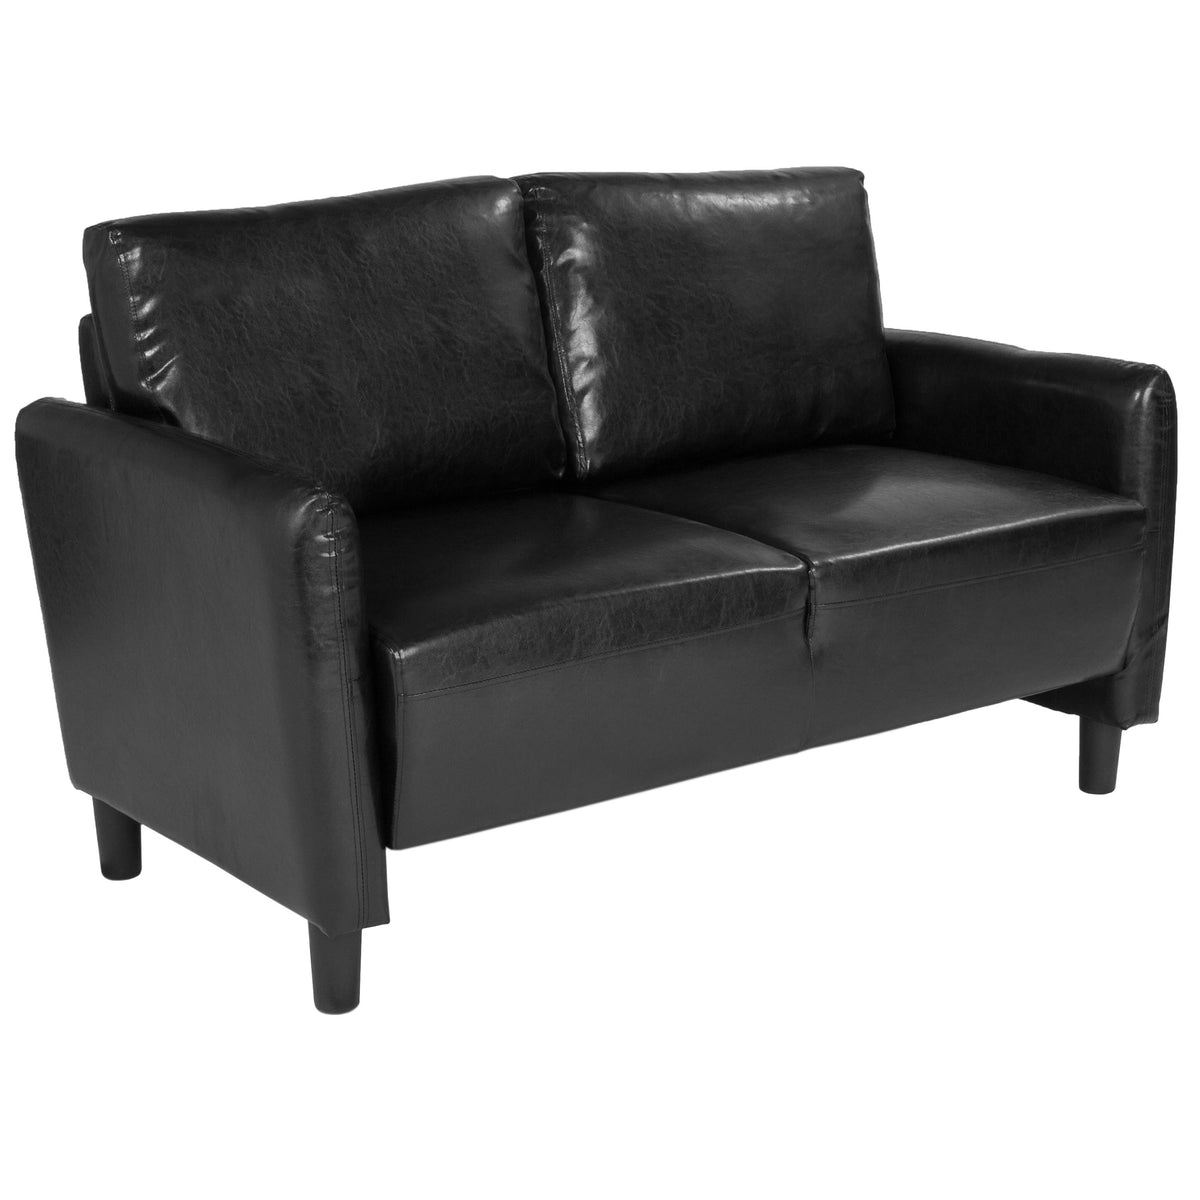 Black LeatherSoft |#| Living Room Loveseat w/Extended Side Panels &Rounded Arms in Black LeatherSoft